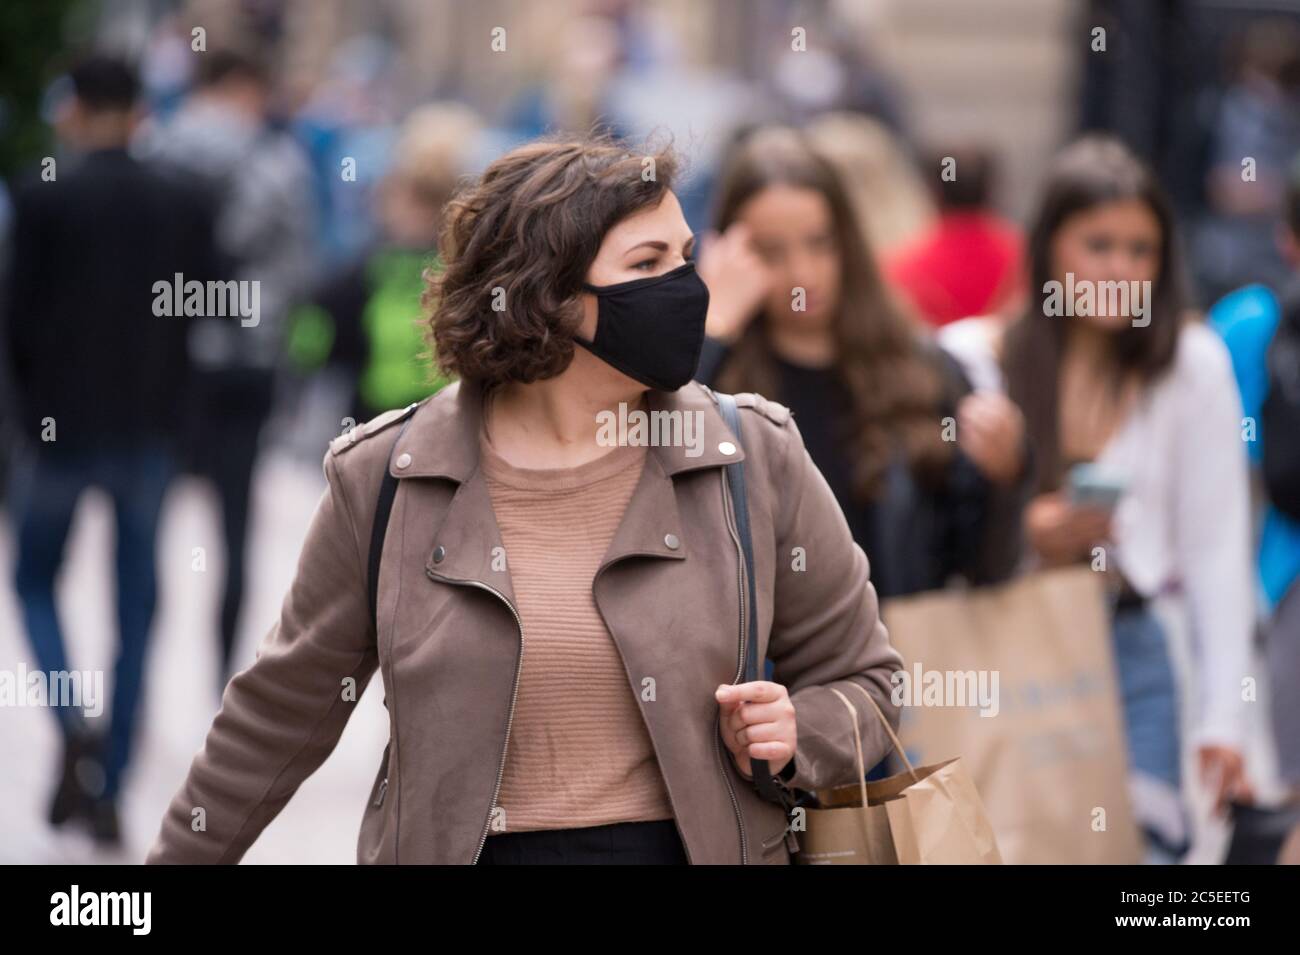 Glasgow, Scotland, UK. 2nd July, 2020. Pictured: Scenes from Glasgows style mile, Buchanan Street shopping area, where more people are seen wearing face masks or home made face coverings. Nicola Sturgeon announced earlier today that wearing a face covering is to become mandatory in shops from 10th July next week. Face coverings are already mandatory when taking public transport in a bid to slow down the spread of coronavirus. Credit: Colin Fisher/Alamy Live News Stock Photo